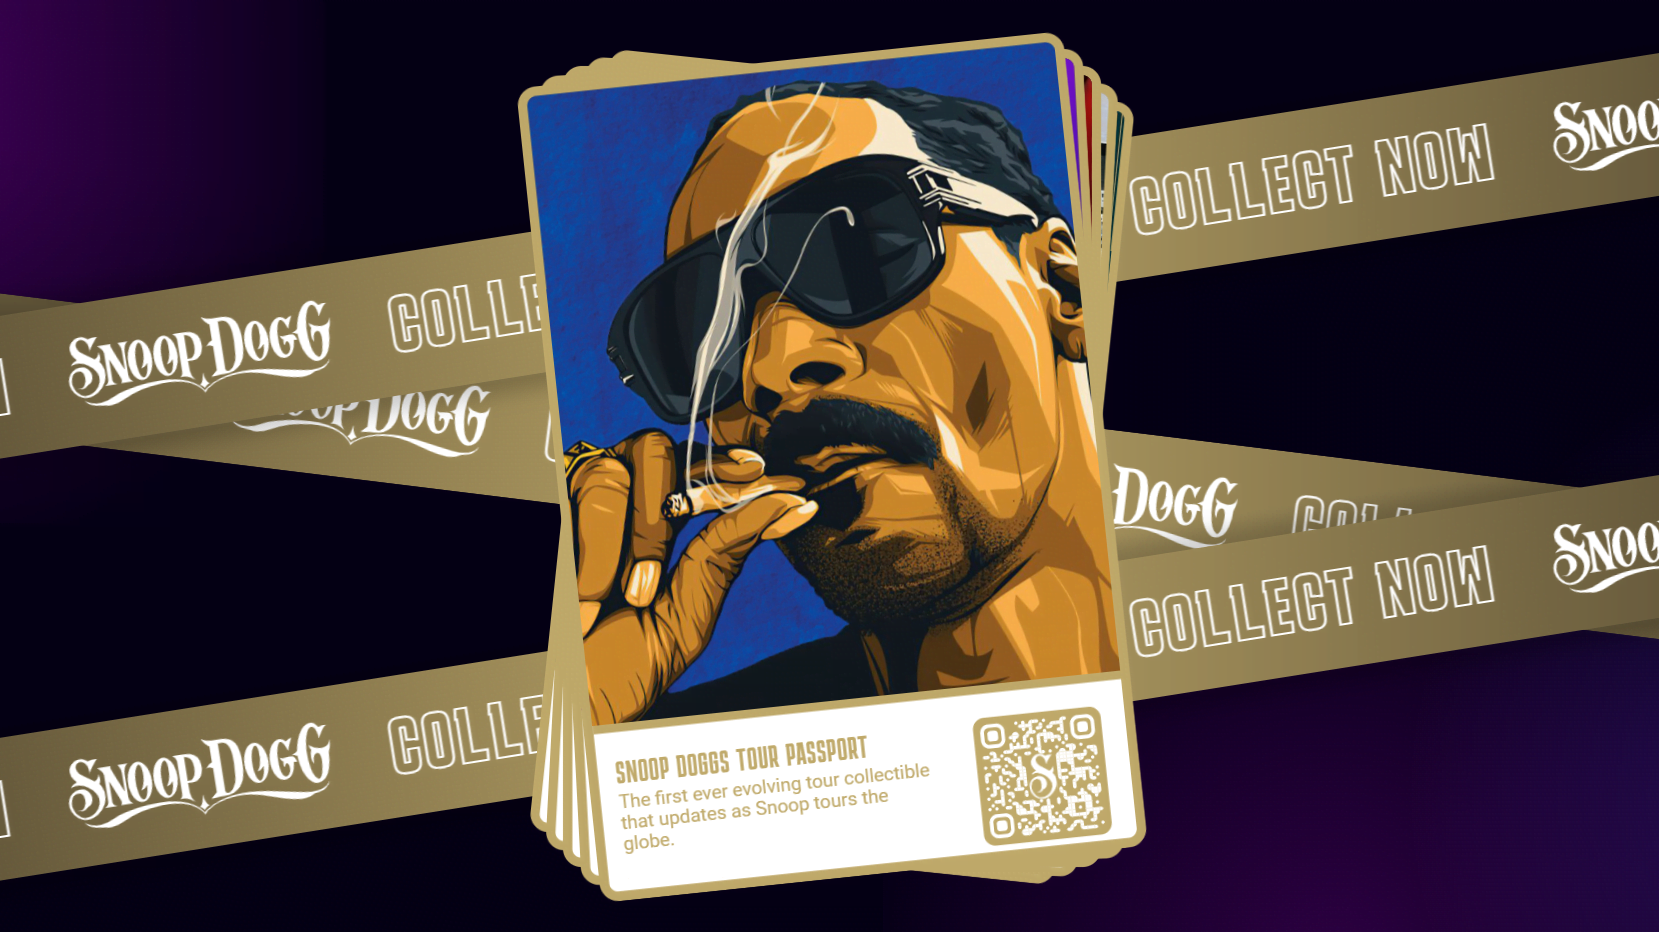 Snoop Dogg takes his fans on a digital journey with the new NFT Passport series